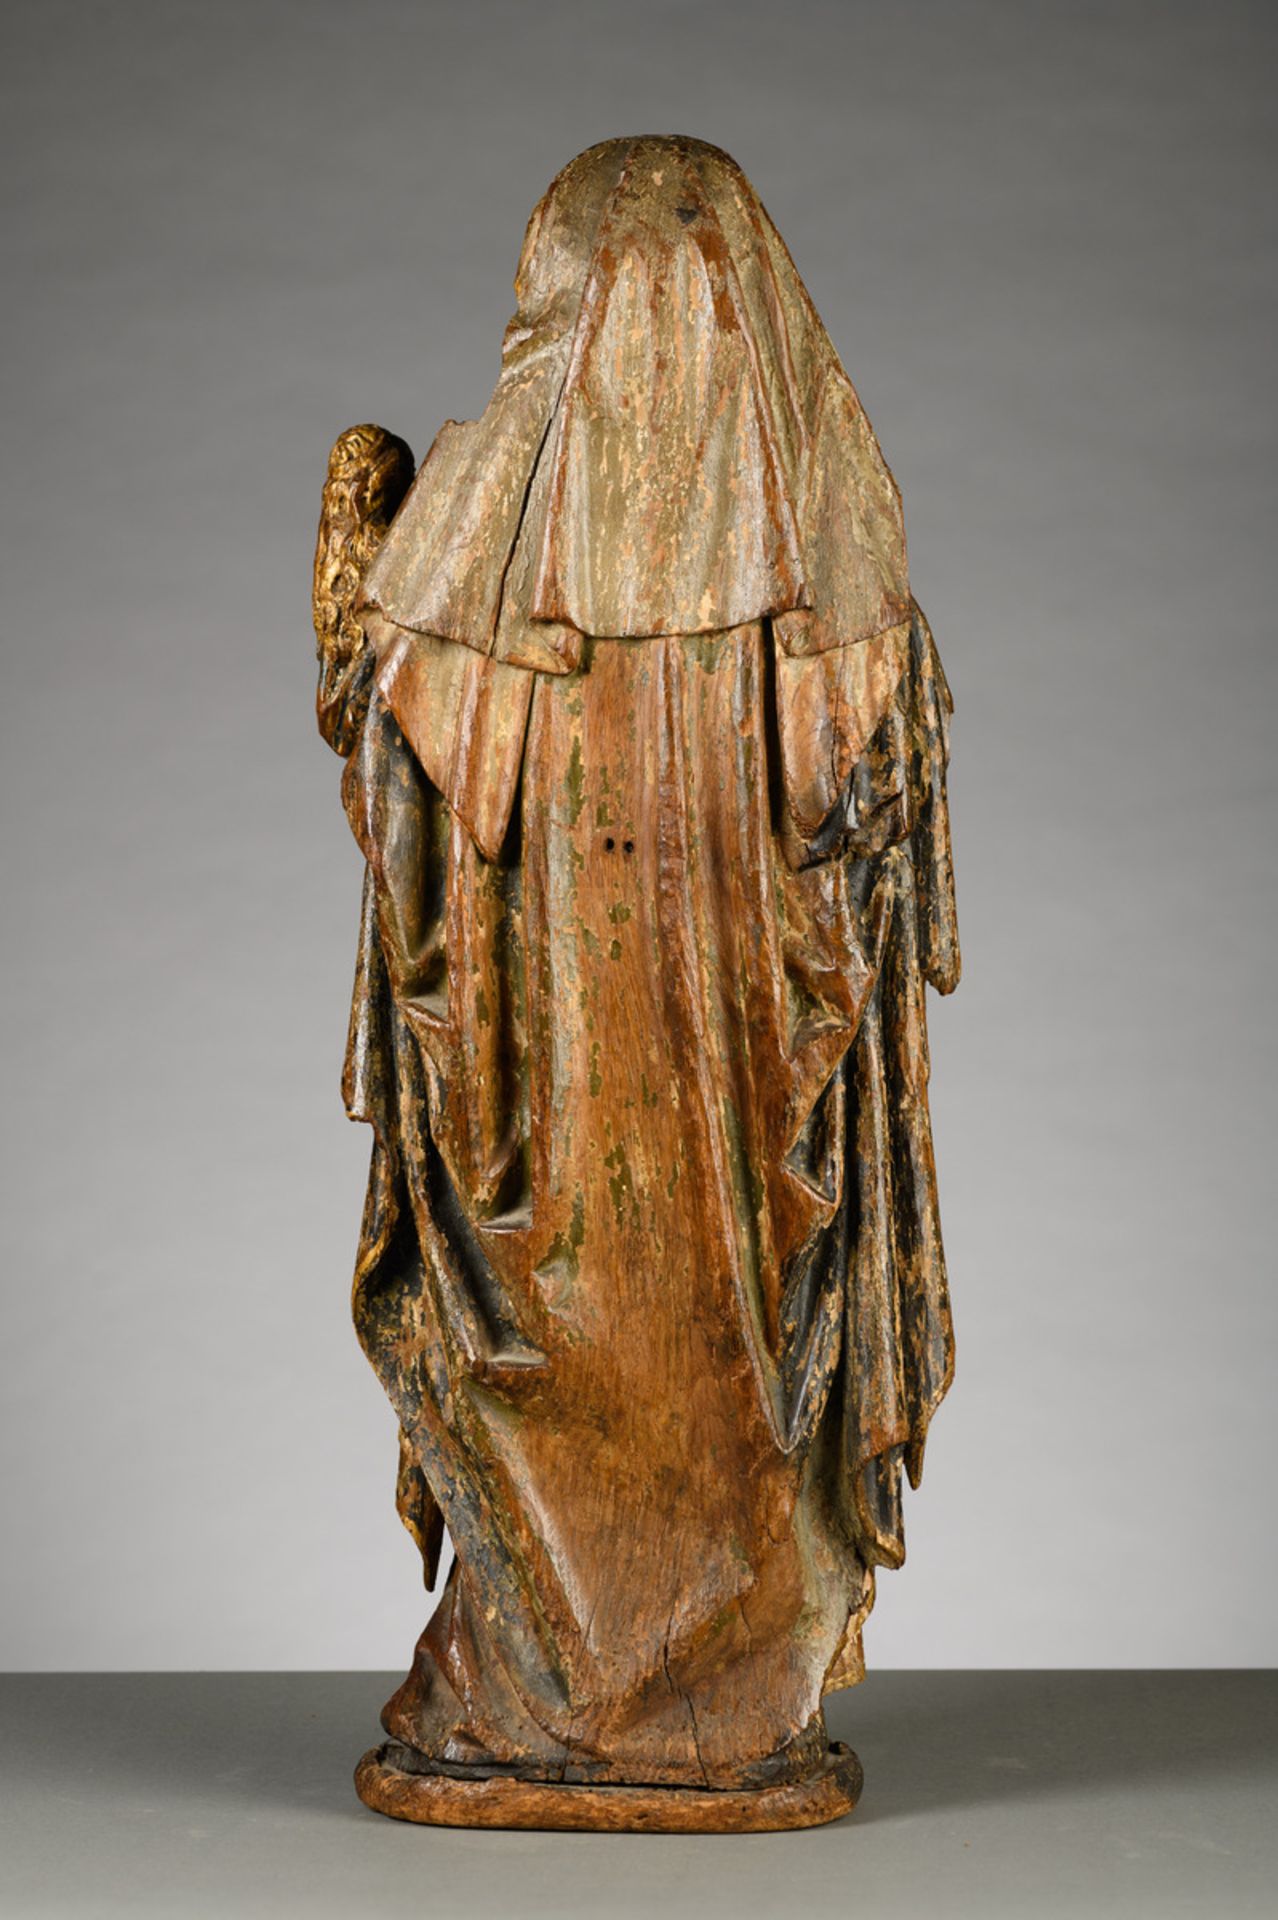 Polychrome wooden statue 'The Virgin and Child with St. Anne' 15th - 16th century (h68cm) - Image 4 of 7